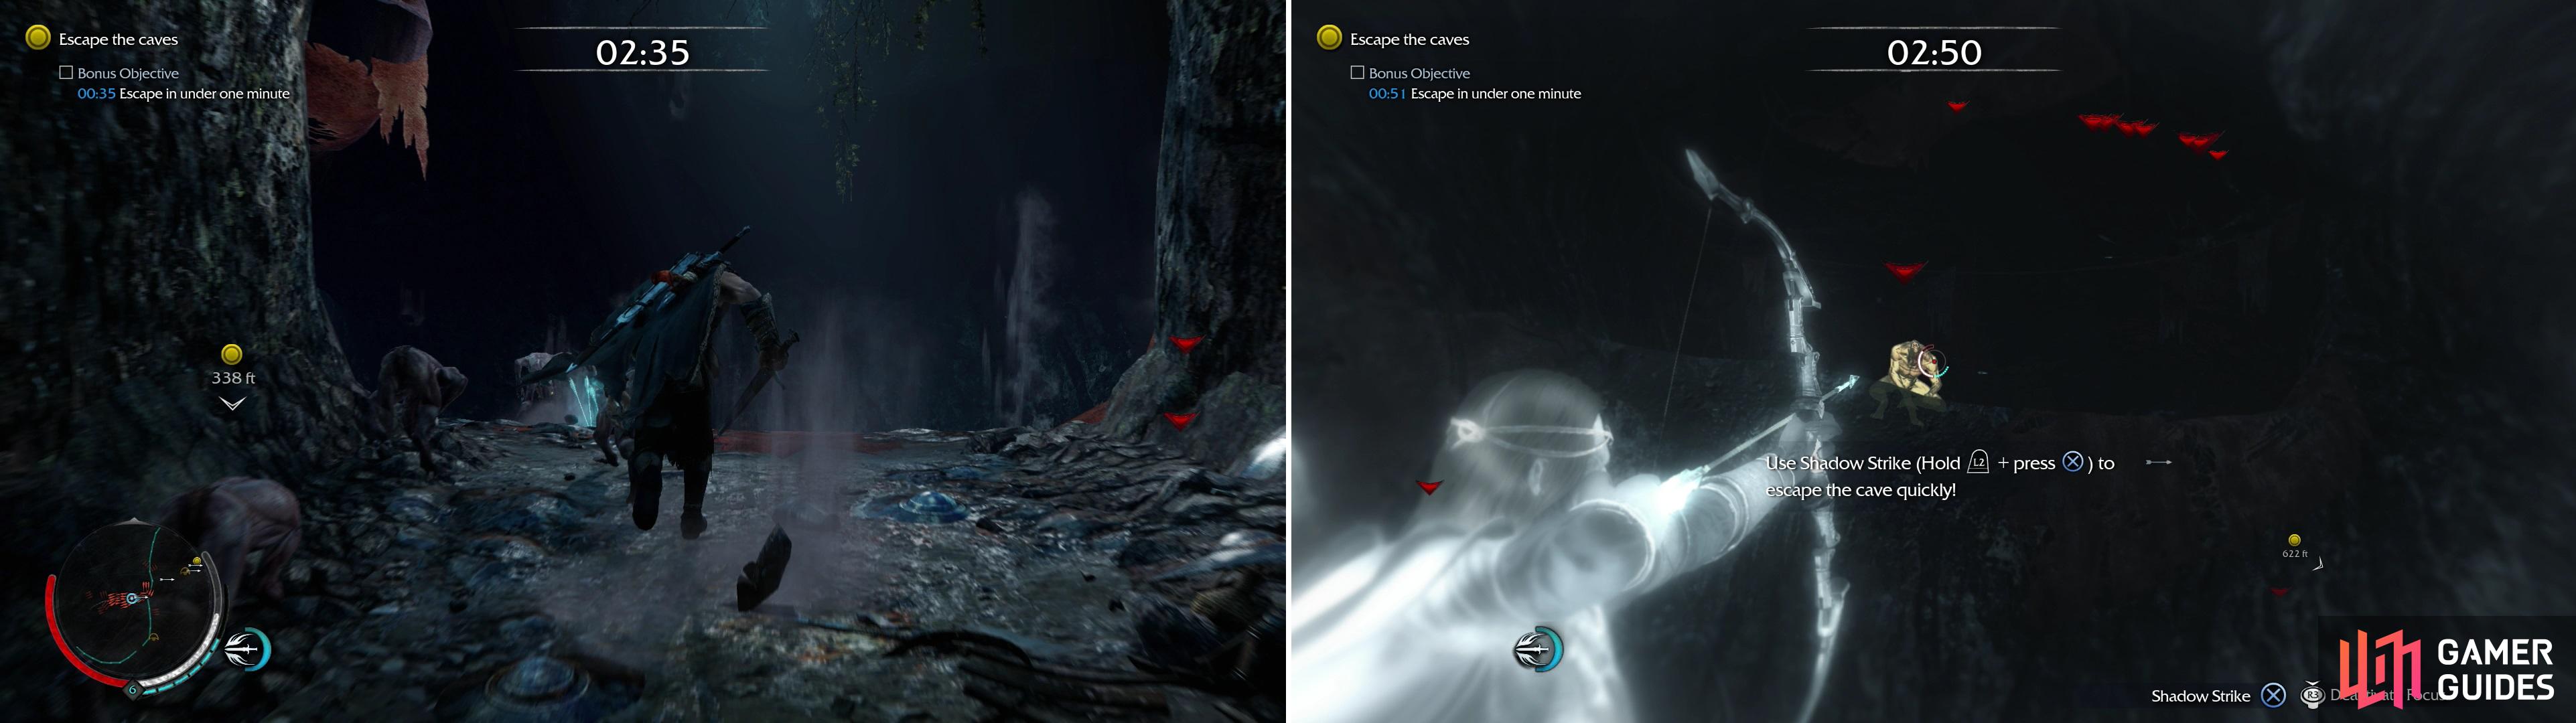 Escape the cave quickly and ignore the Ghuls that try to distract you (left). Performing Shadow Strikes on advantageously place Ghuls can speed up this process (right).